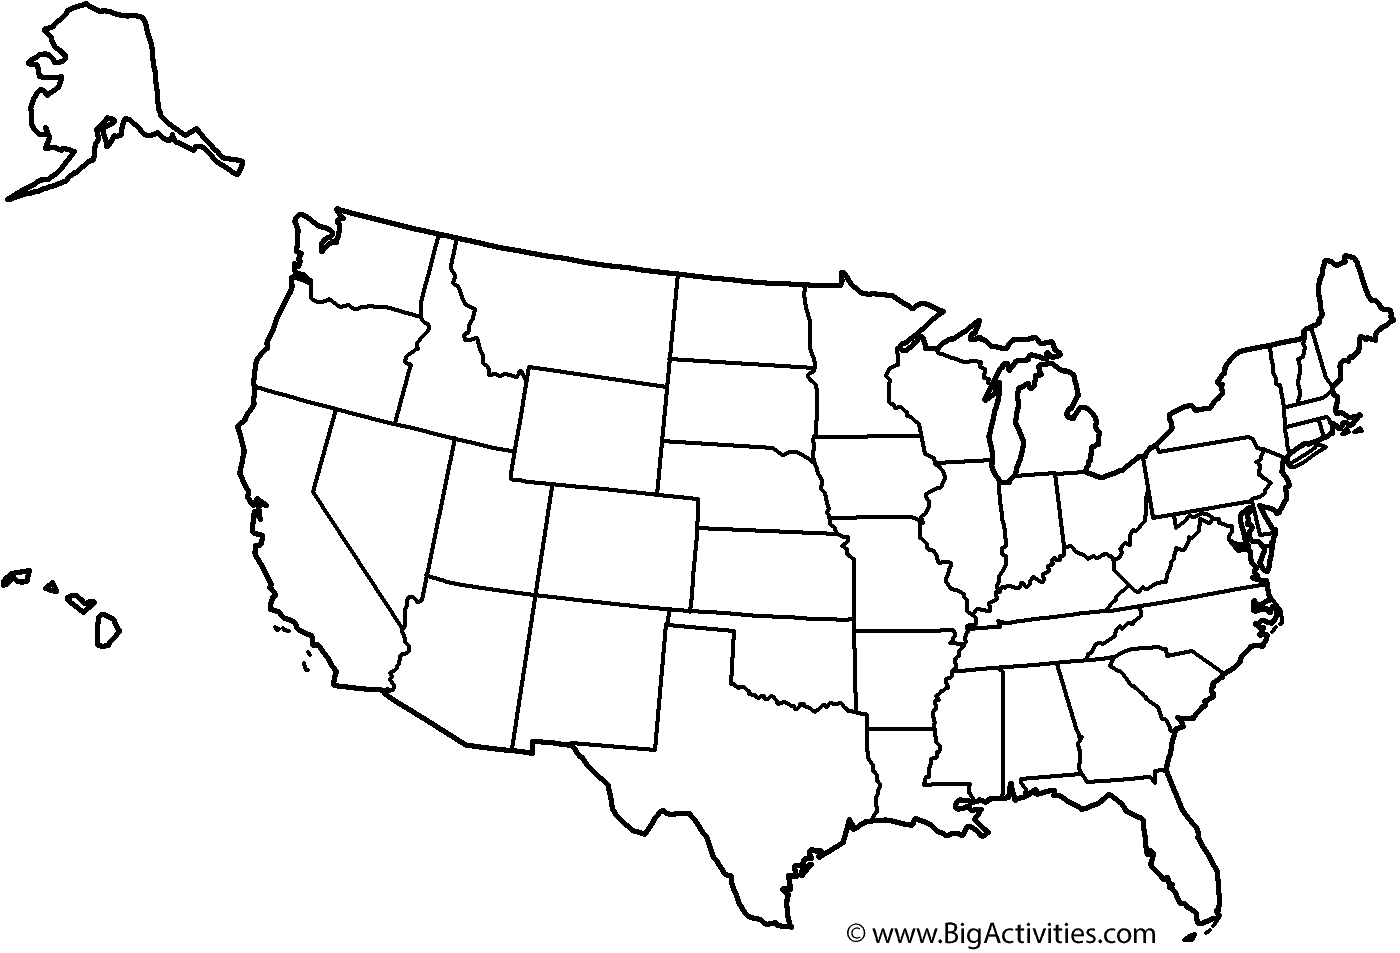 Map of the United States with title and states Coloring Page